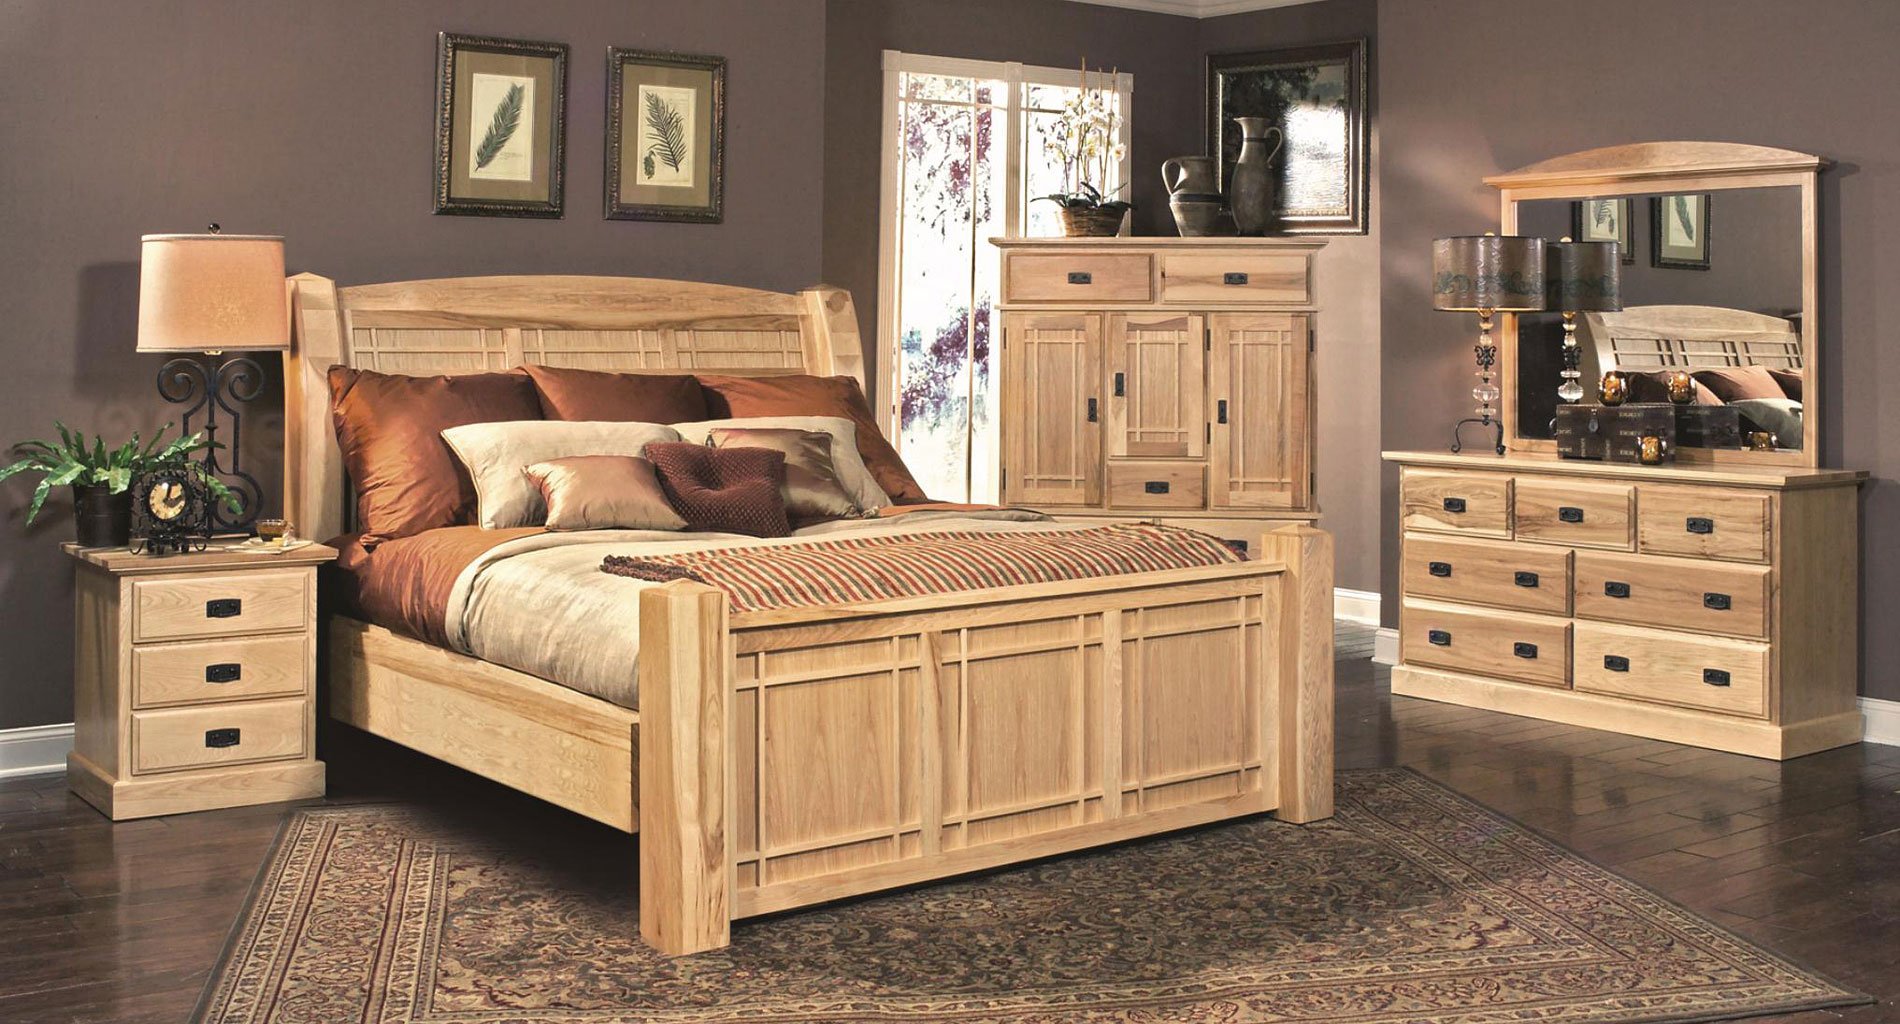 made in the usa bedroom furniture